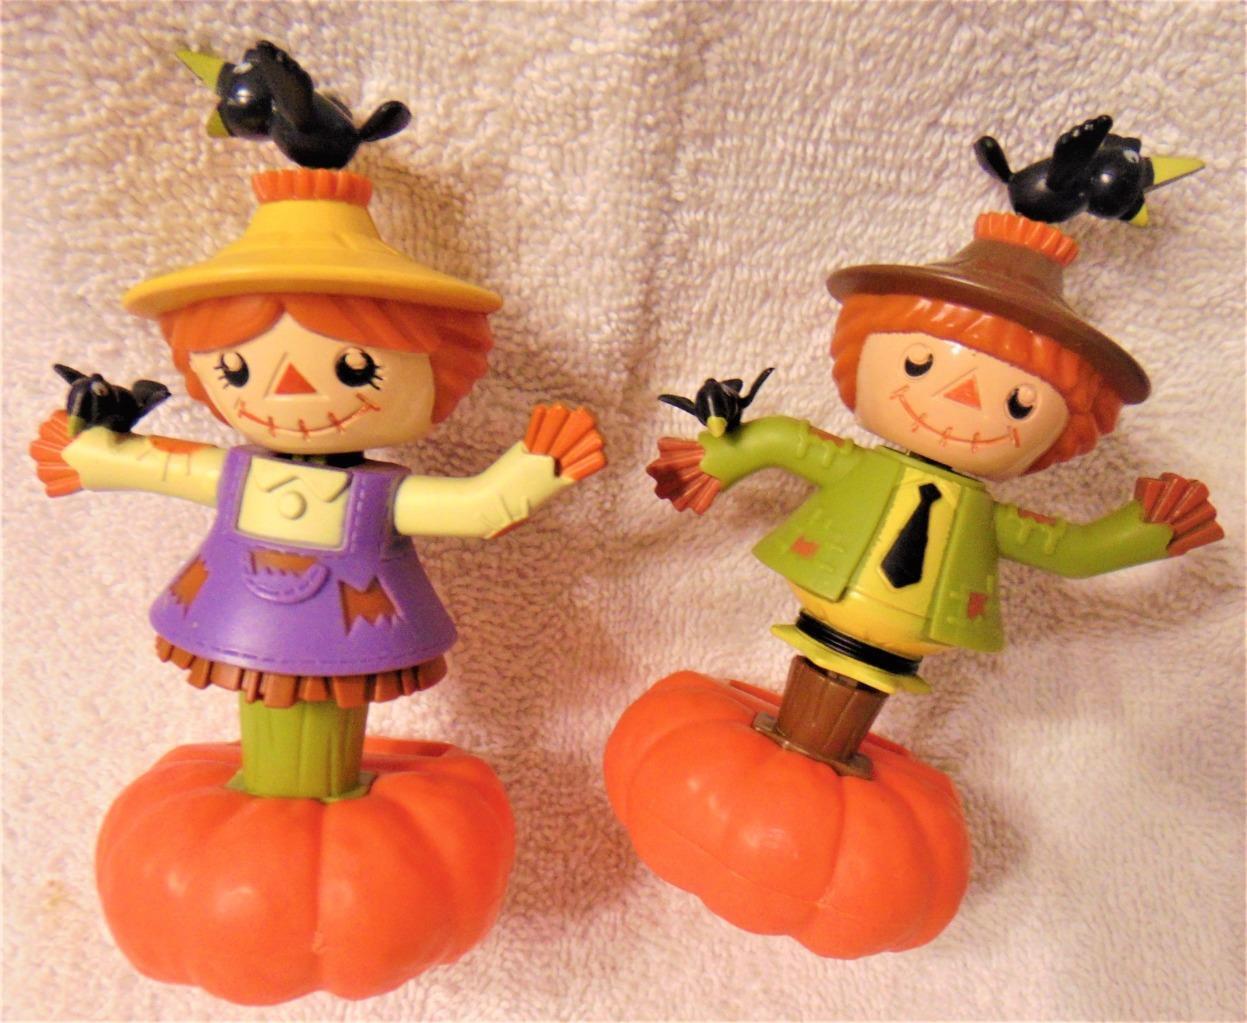 Solar Powered Halloween 2 Scarecrows Dancing Bobbles 2016 Toy Crow Pumpkin Fall